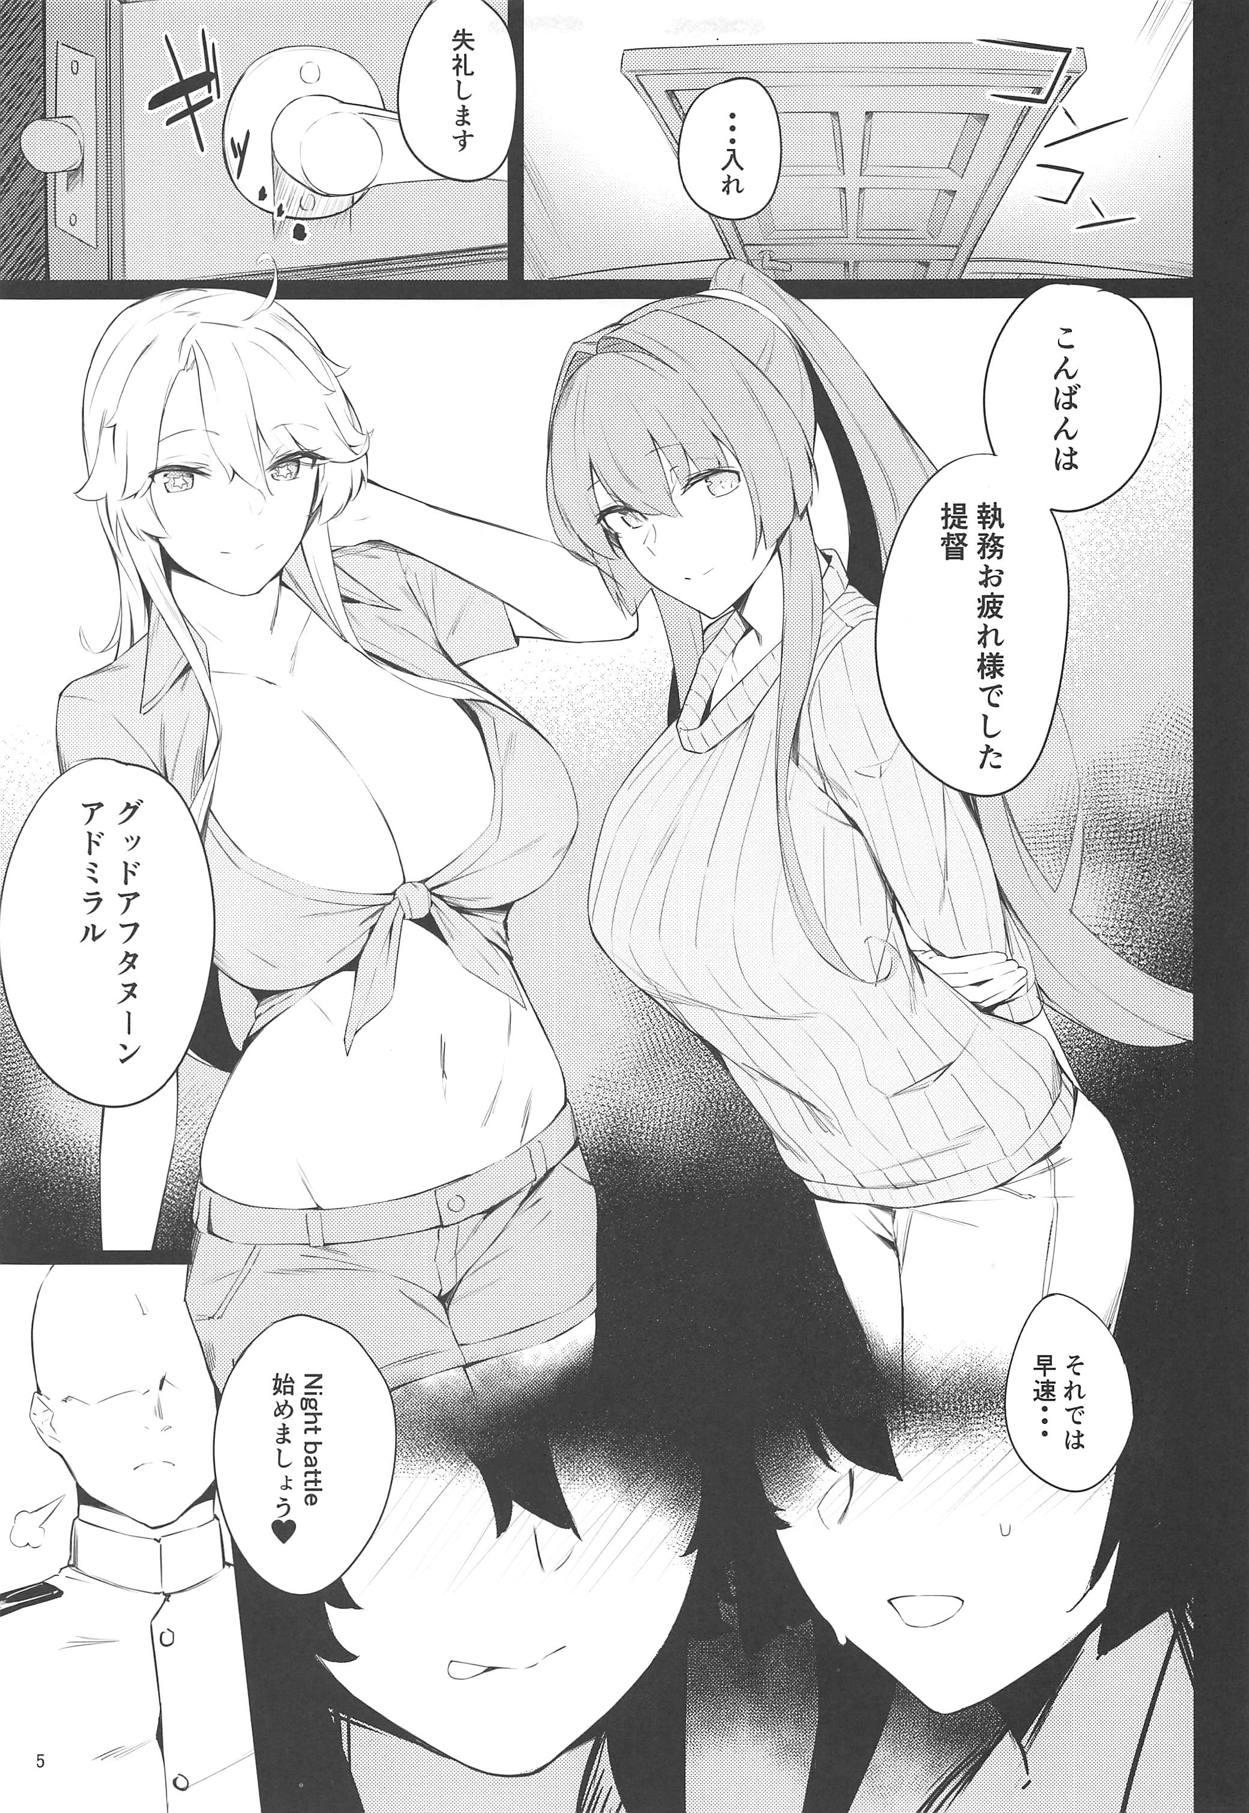 Caliente BLEND - Kantai collection Free Blowjobs - Page 4